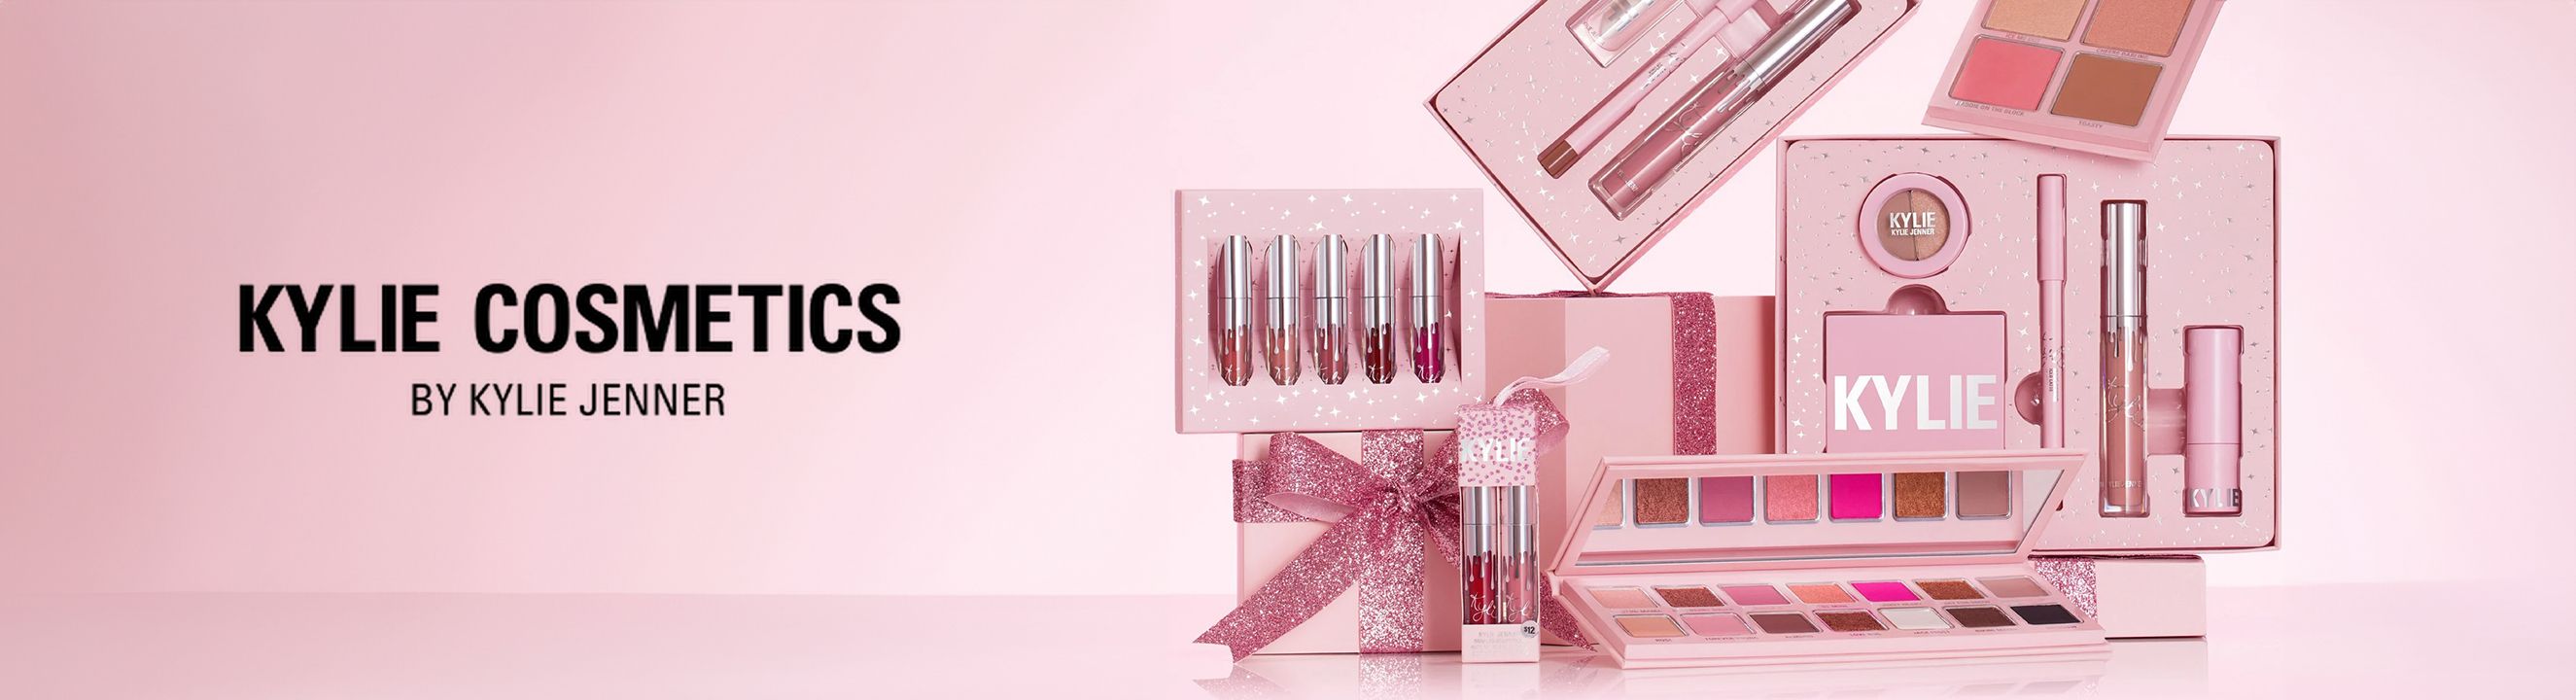 kylie-cosmetics-collection